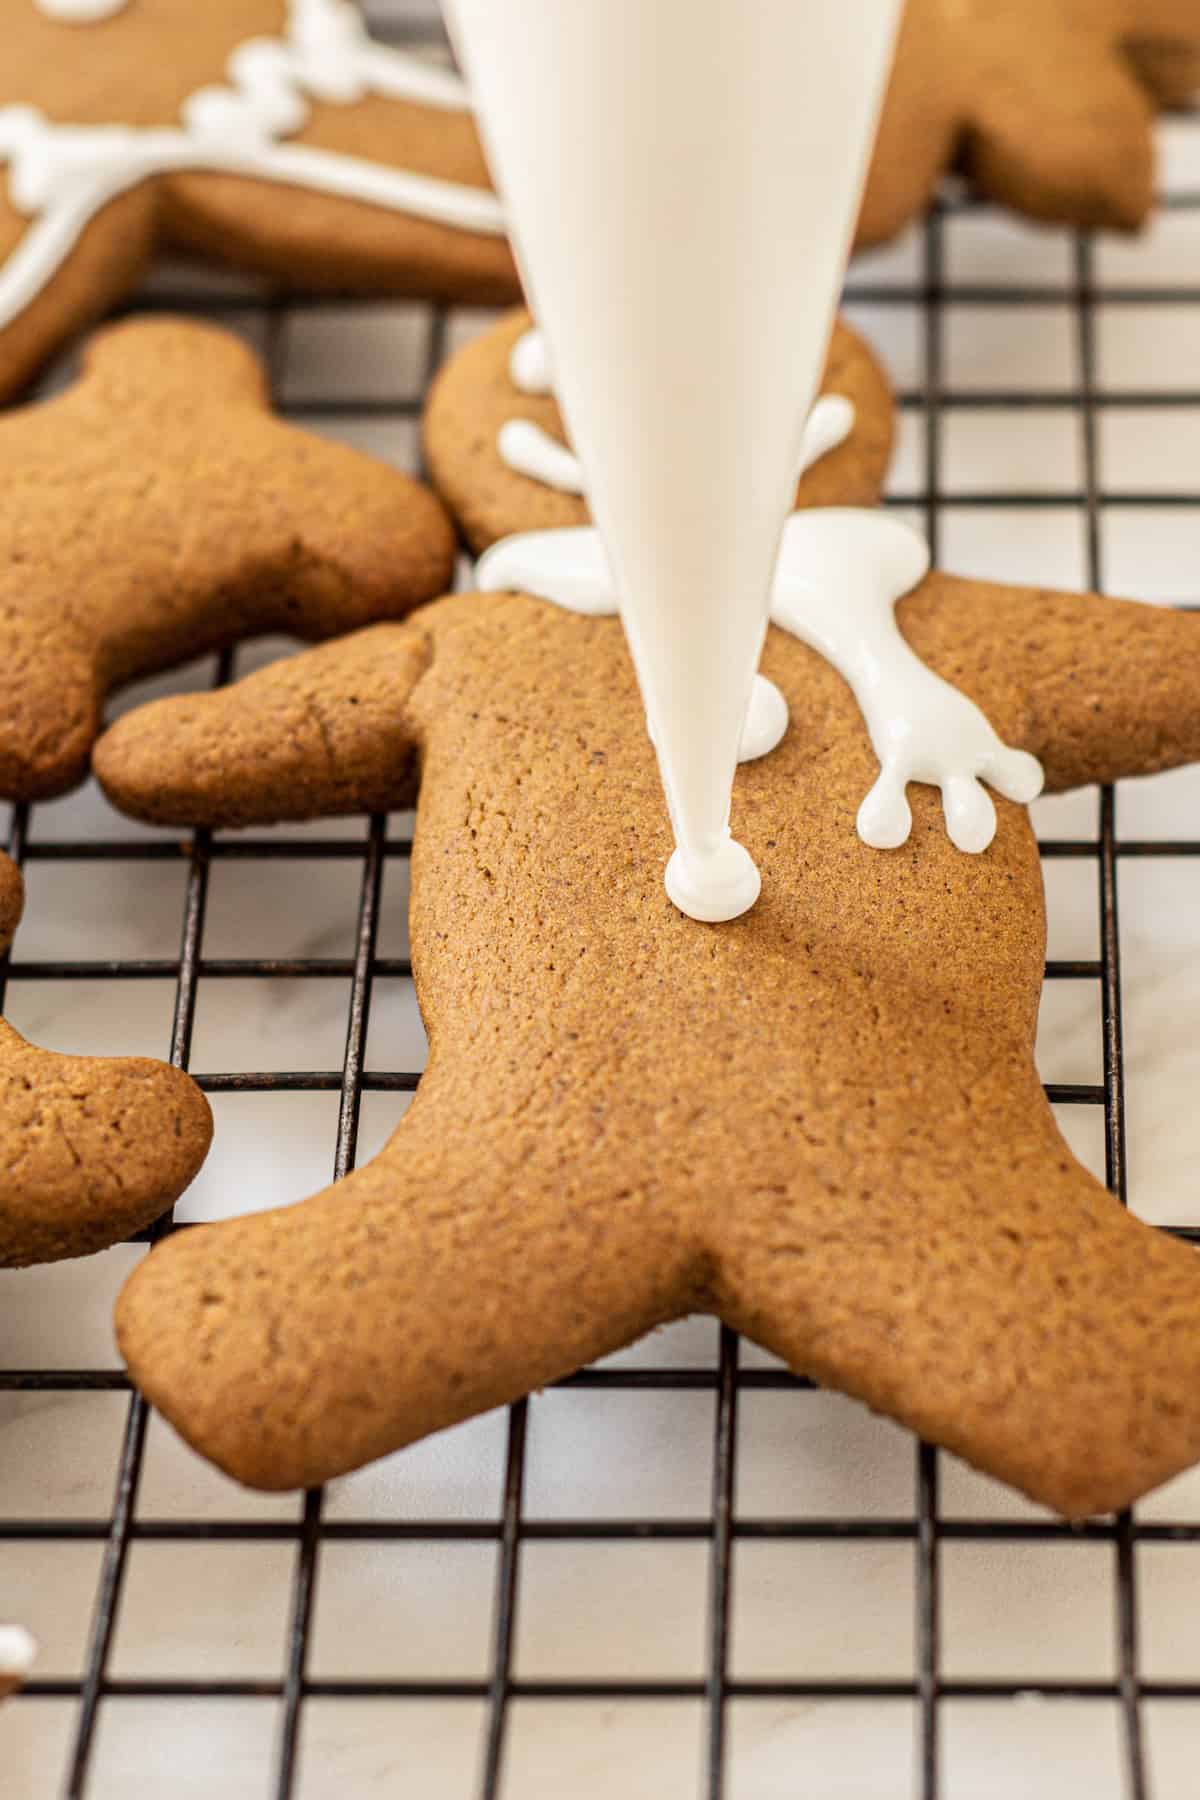 icing a gingerbread cookie.